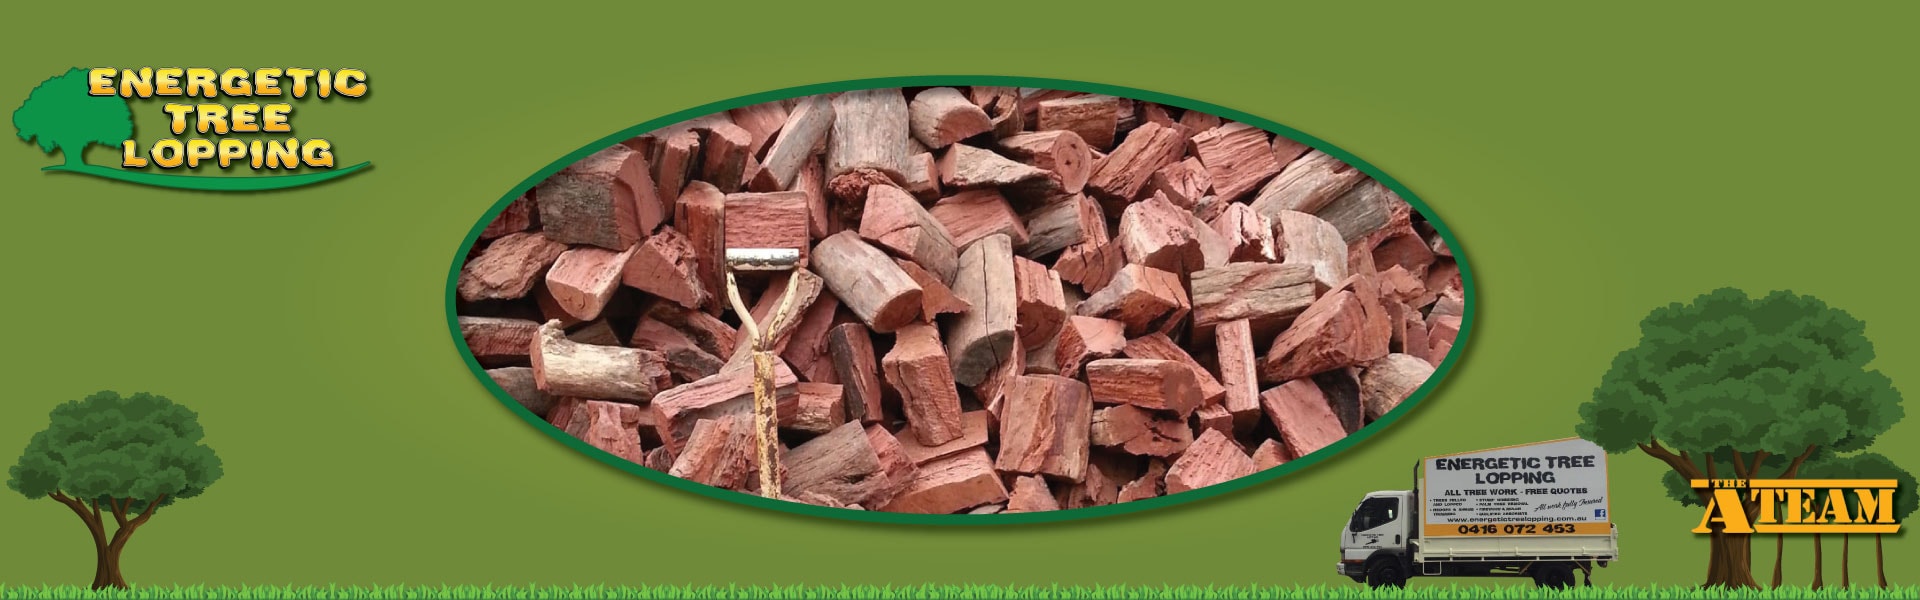 Firewood from Energetic Tree Lopping for sale feature image